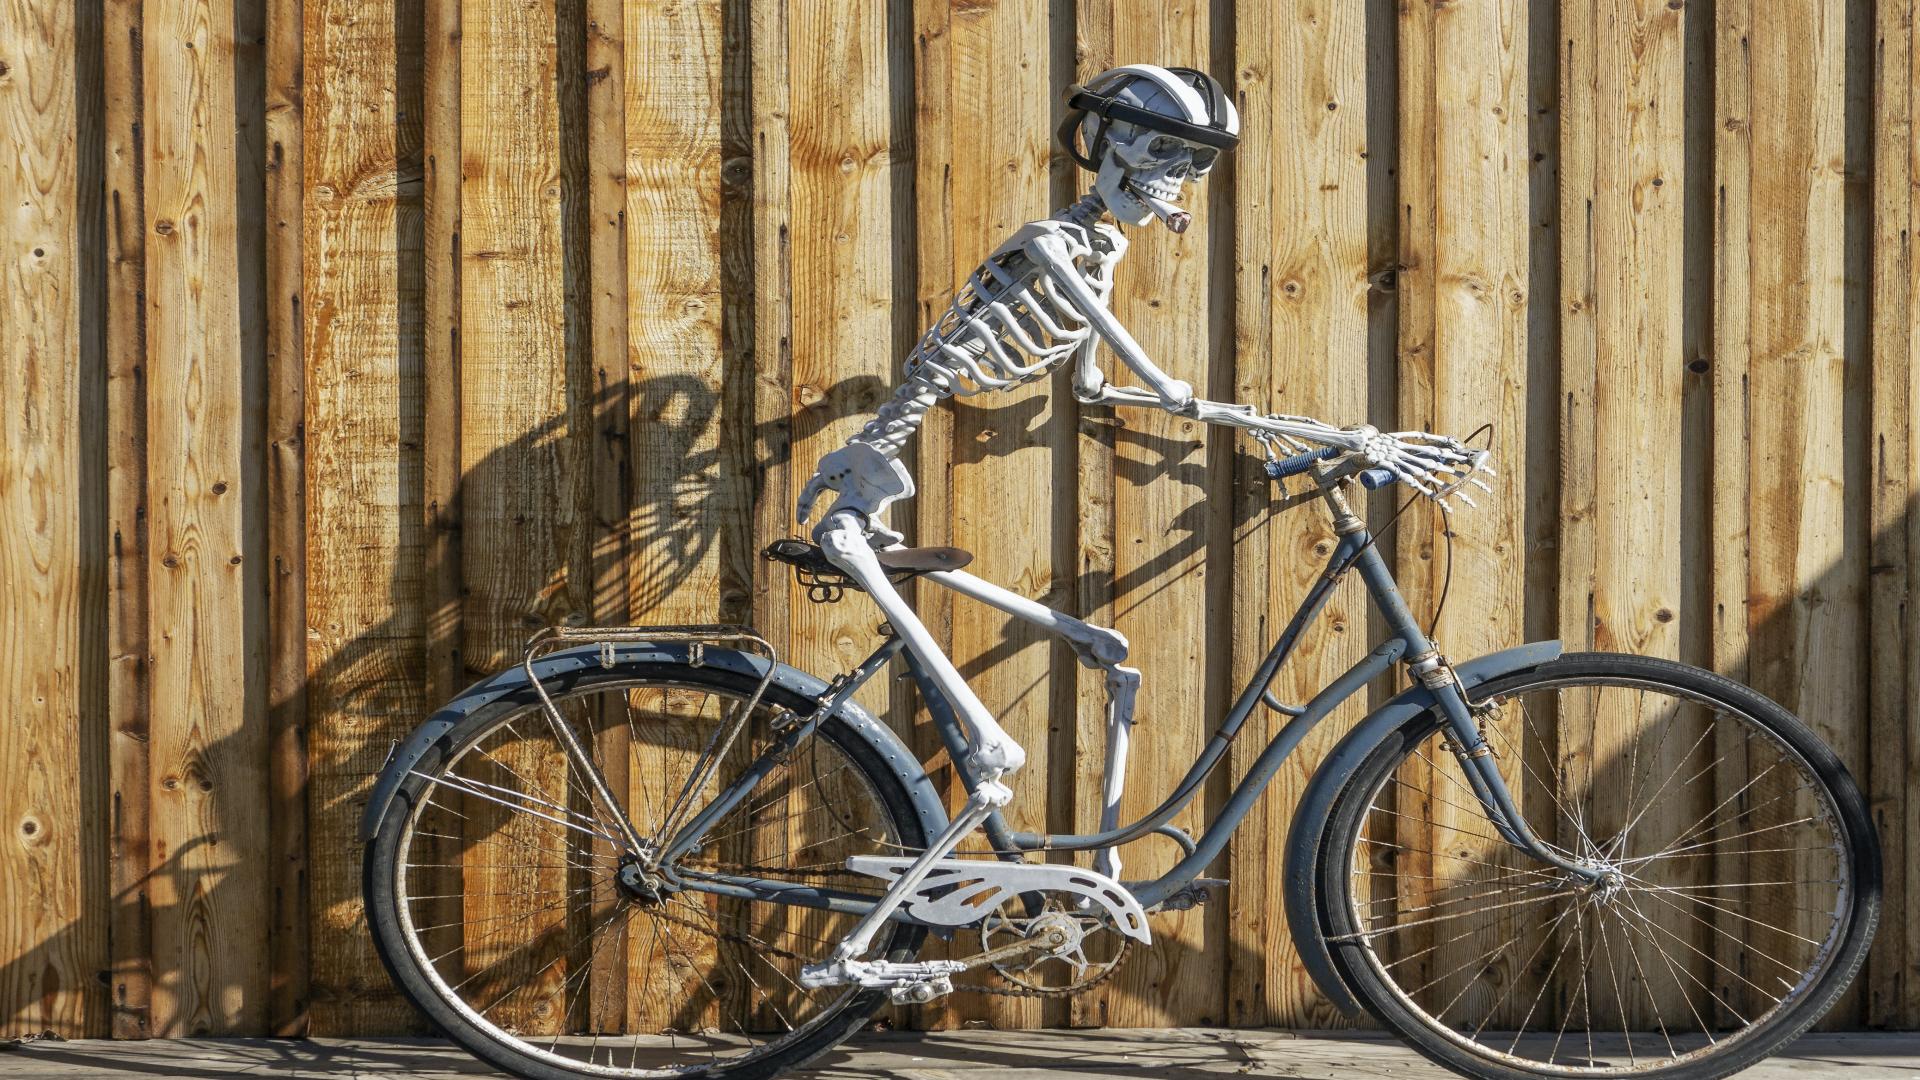 Urban New Halloween, ride your bike and go for some mischief.